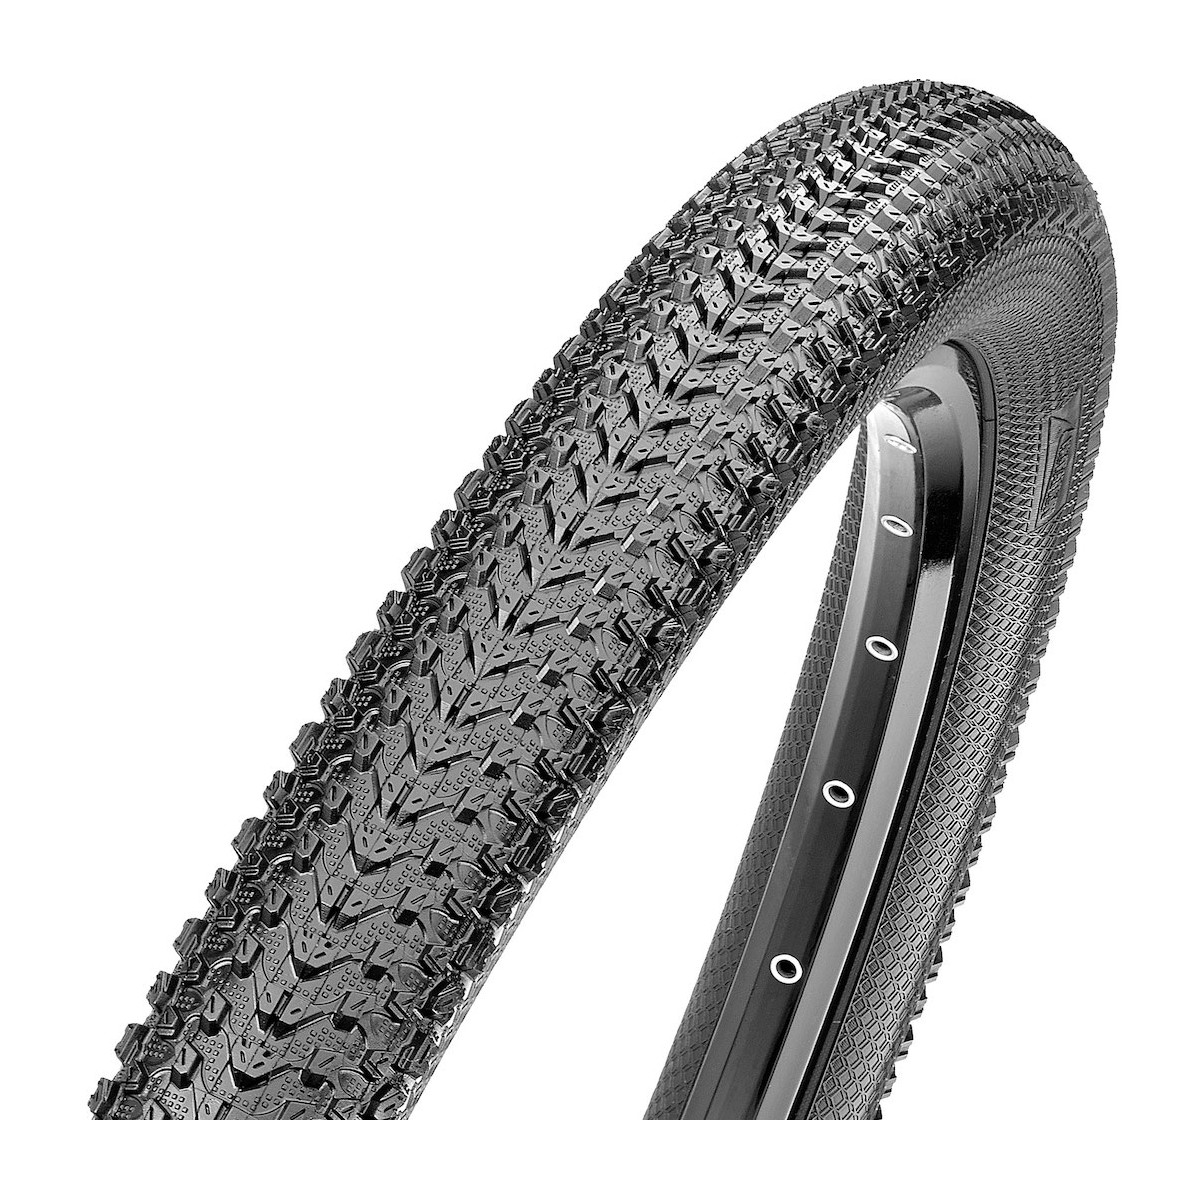 MAXXIS PACE SINGLE 29 x 2.10 tyre